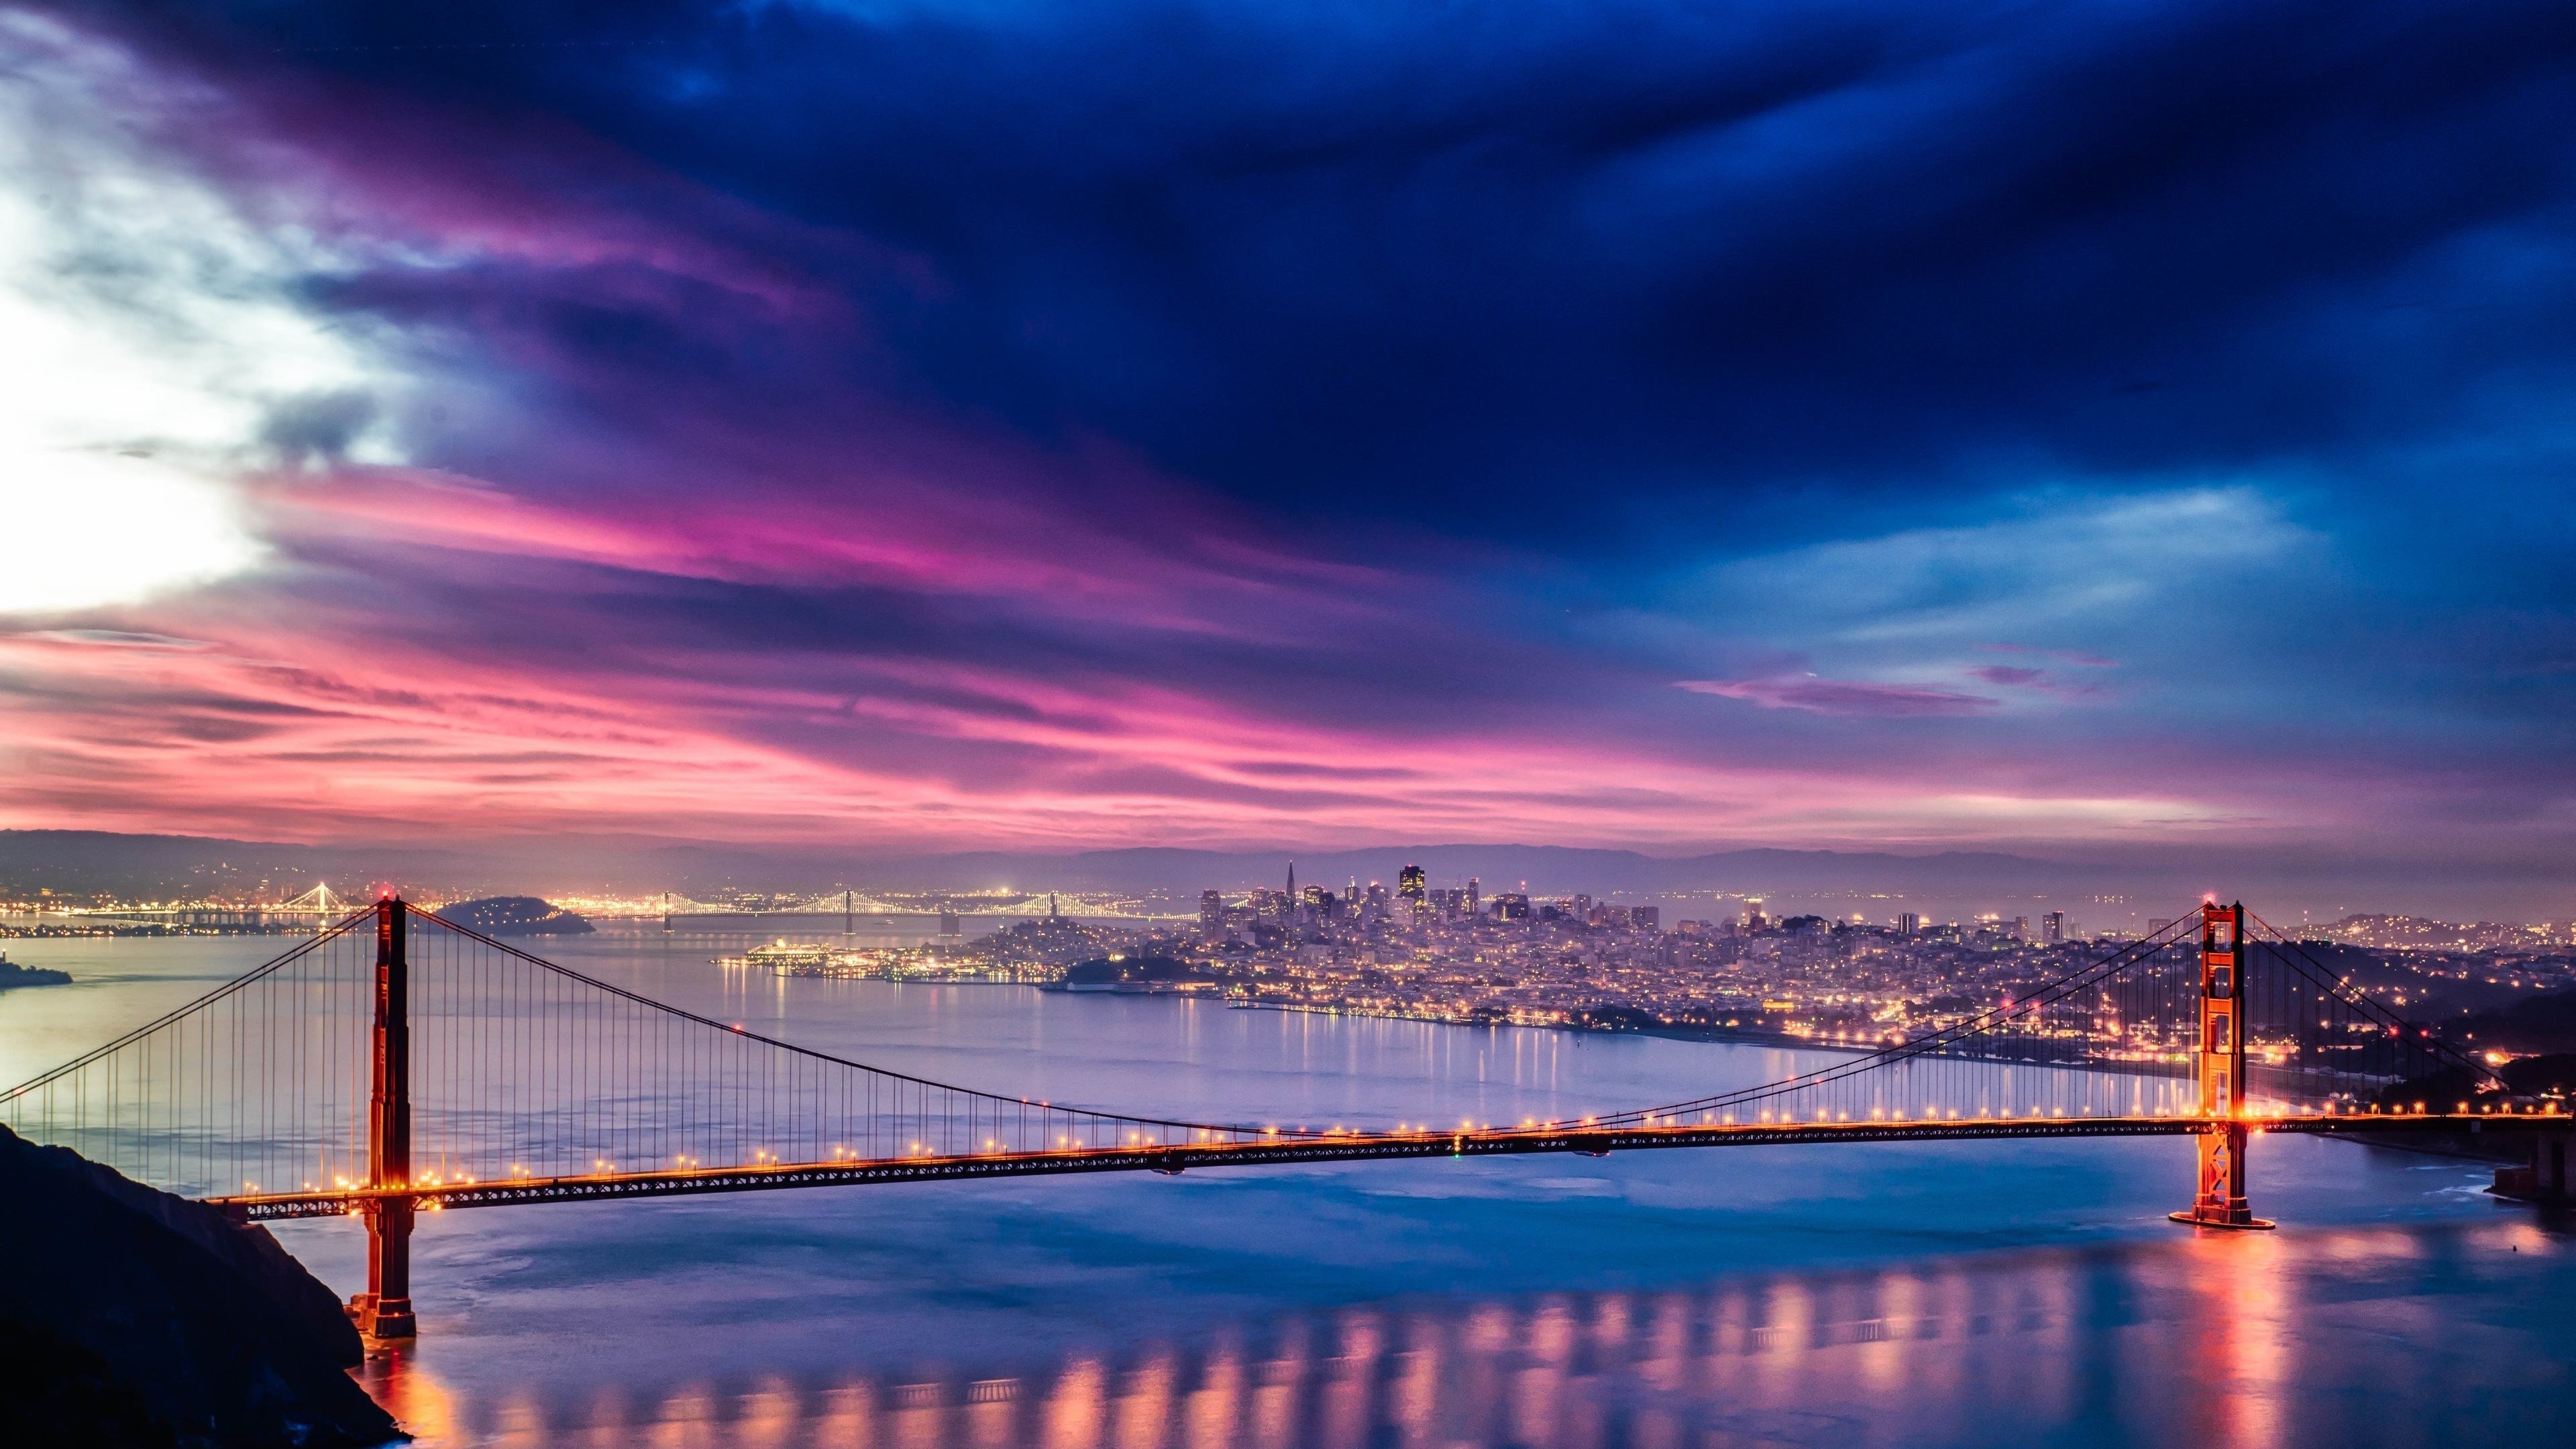 San Francisco: The one-mile-wide strait connecting SF Bay and the Pacific Ocean. 3840x2160 4K Wallpaper.